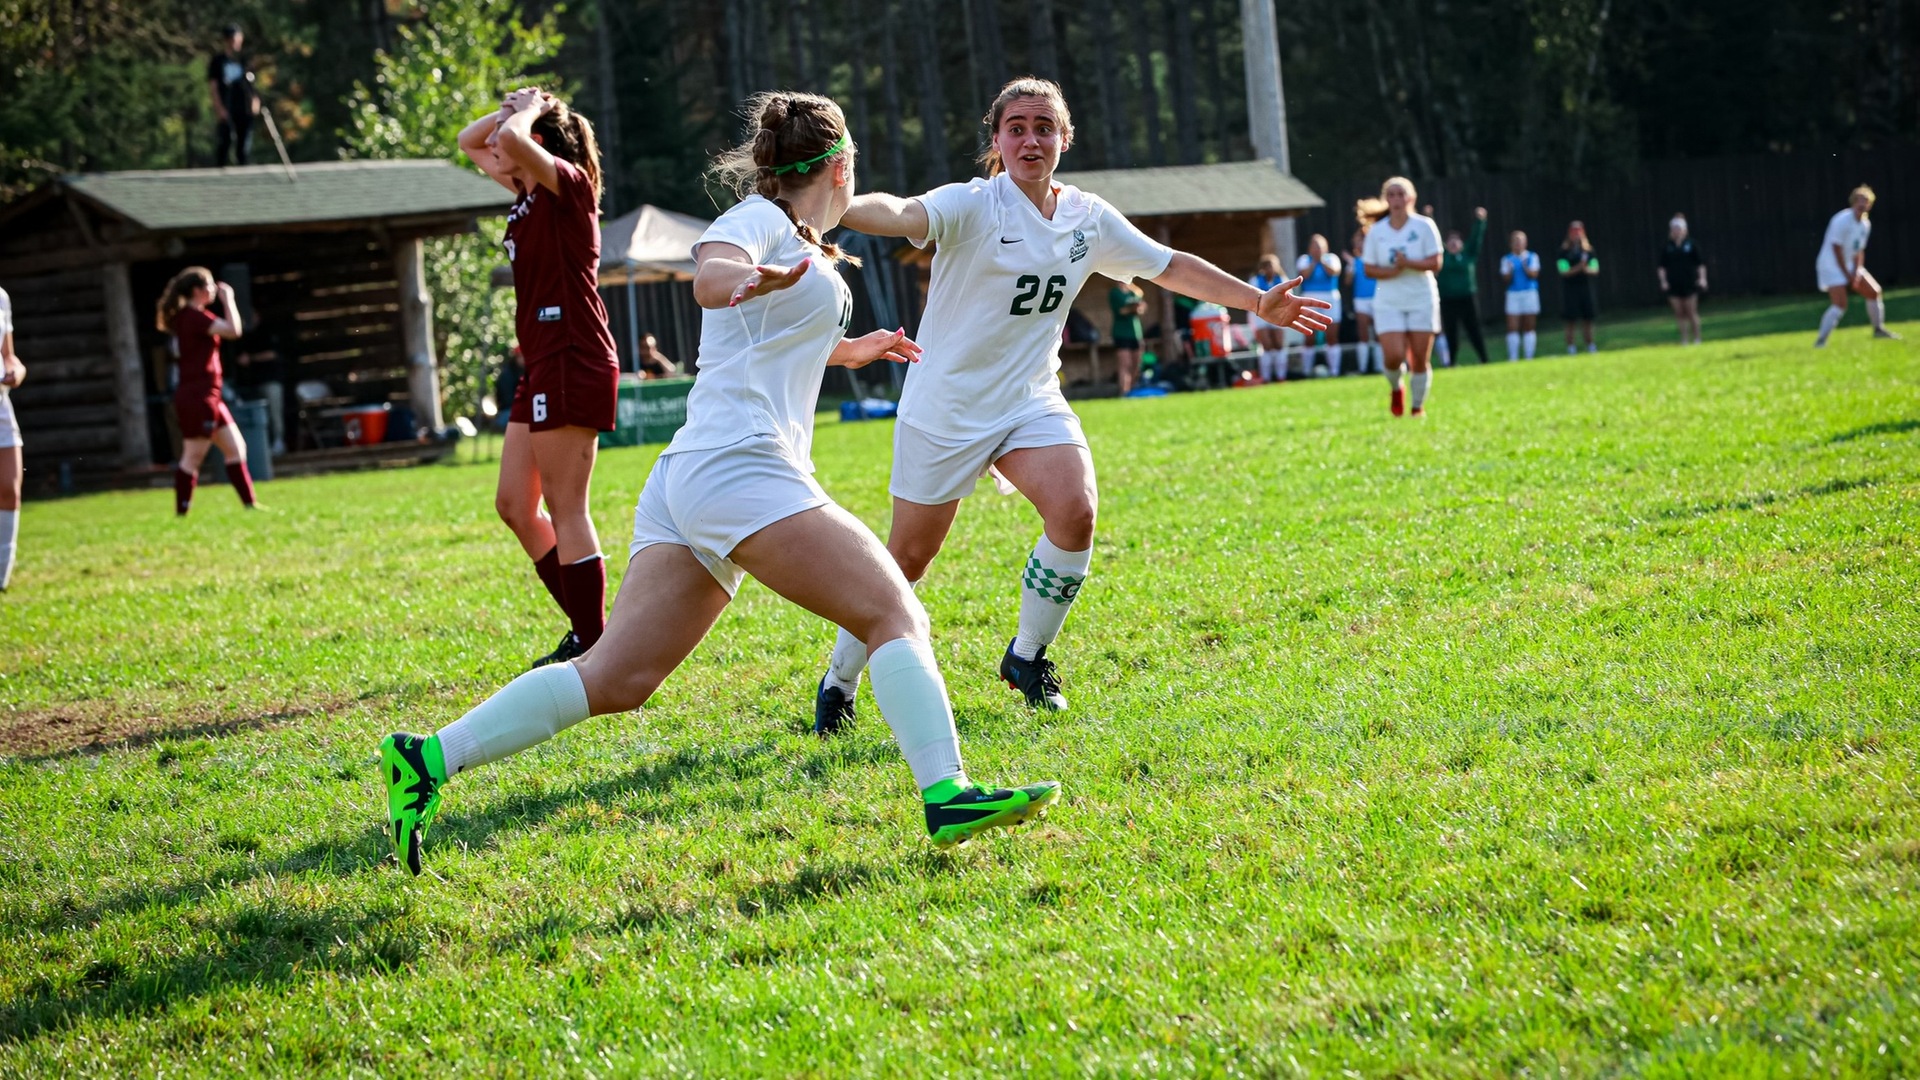 Micaela Diller (left) and Grace Kronick (right) celebrate after a goal in the first half (Mercedes Rideout photo). Thumbnail